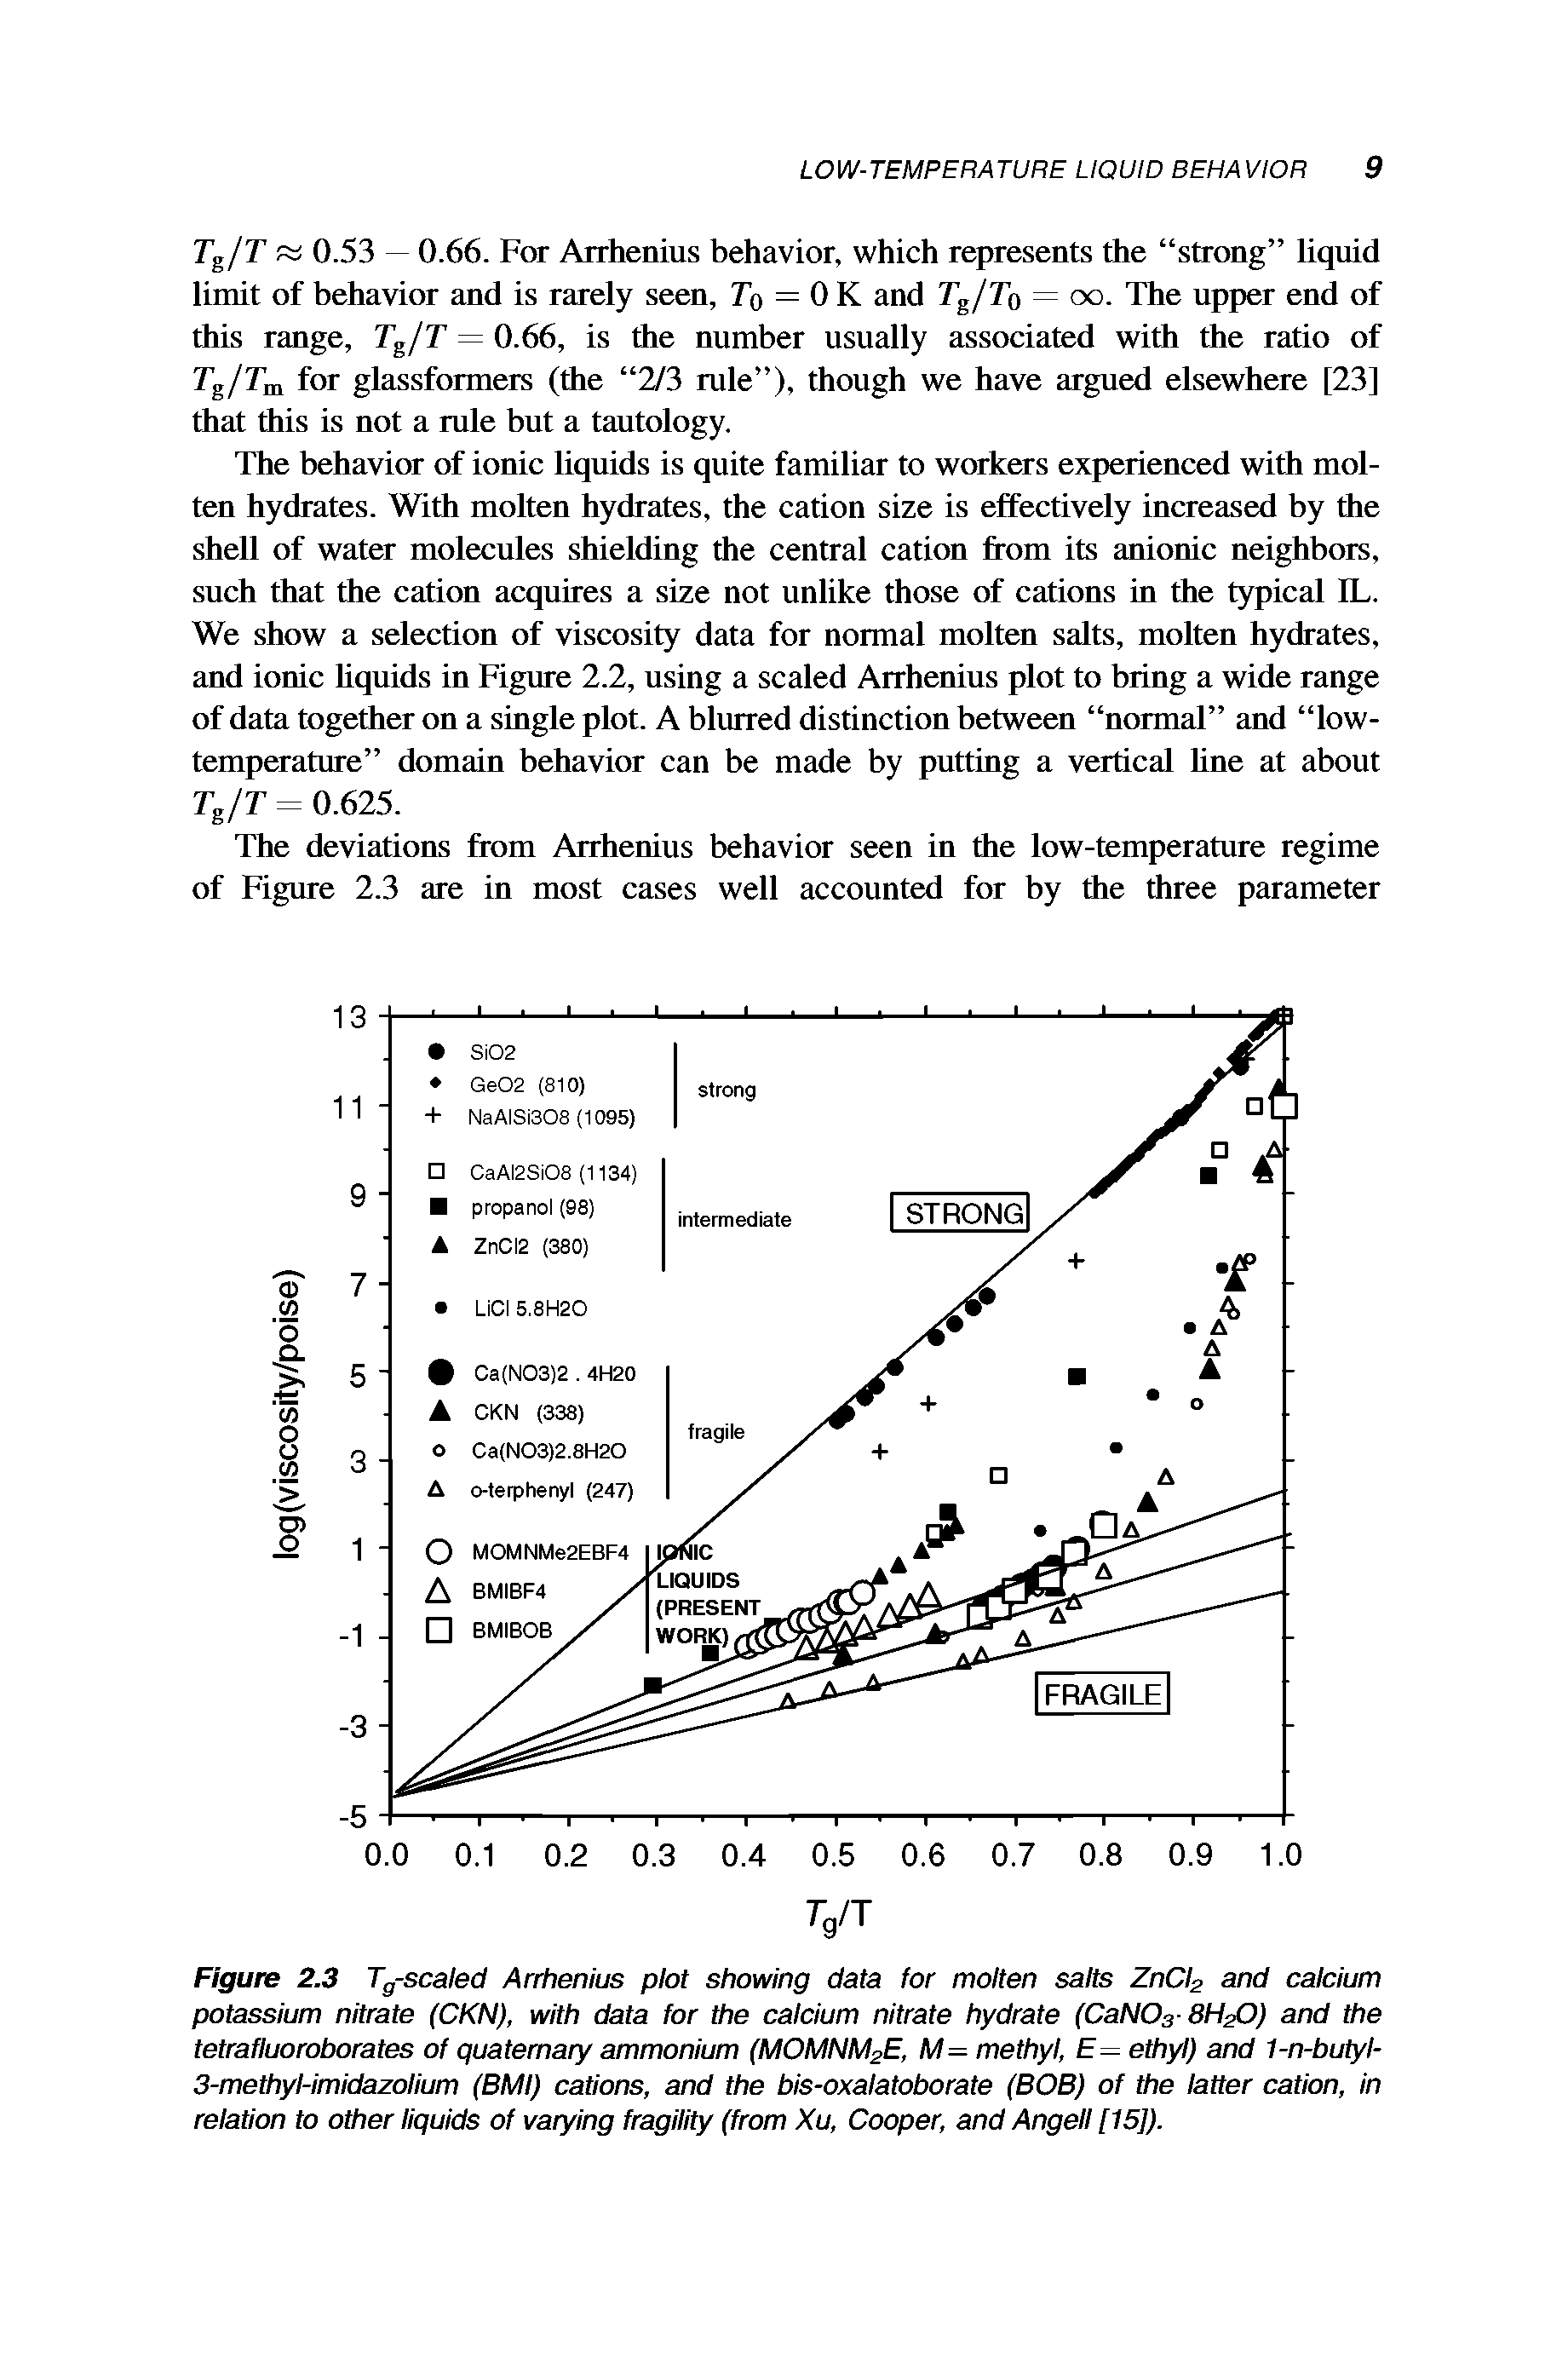 Figure 2.3 TgScaled Arrhenius plot showing data for molten salts ZnCl2 and calcium potassium nitrate (CKN), with data for the calcium nitrate hydrate (CaNOs-W ) and the tetrafluoroborates of quaternary ammonium (MOMNM2E, M= methyl, E = ethyl) and 1-n-butyl-3-methyl-imidazolium (BMI) cations, and the bis-oxalatoborate (BOB) of the latter cation, in relation to other liquids of varying fragility (from Xu, Cooper, and Angell [15]).